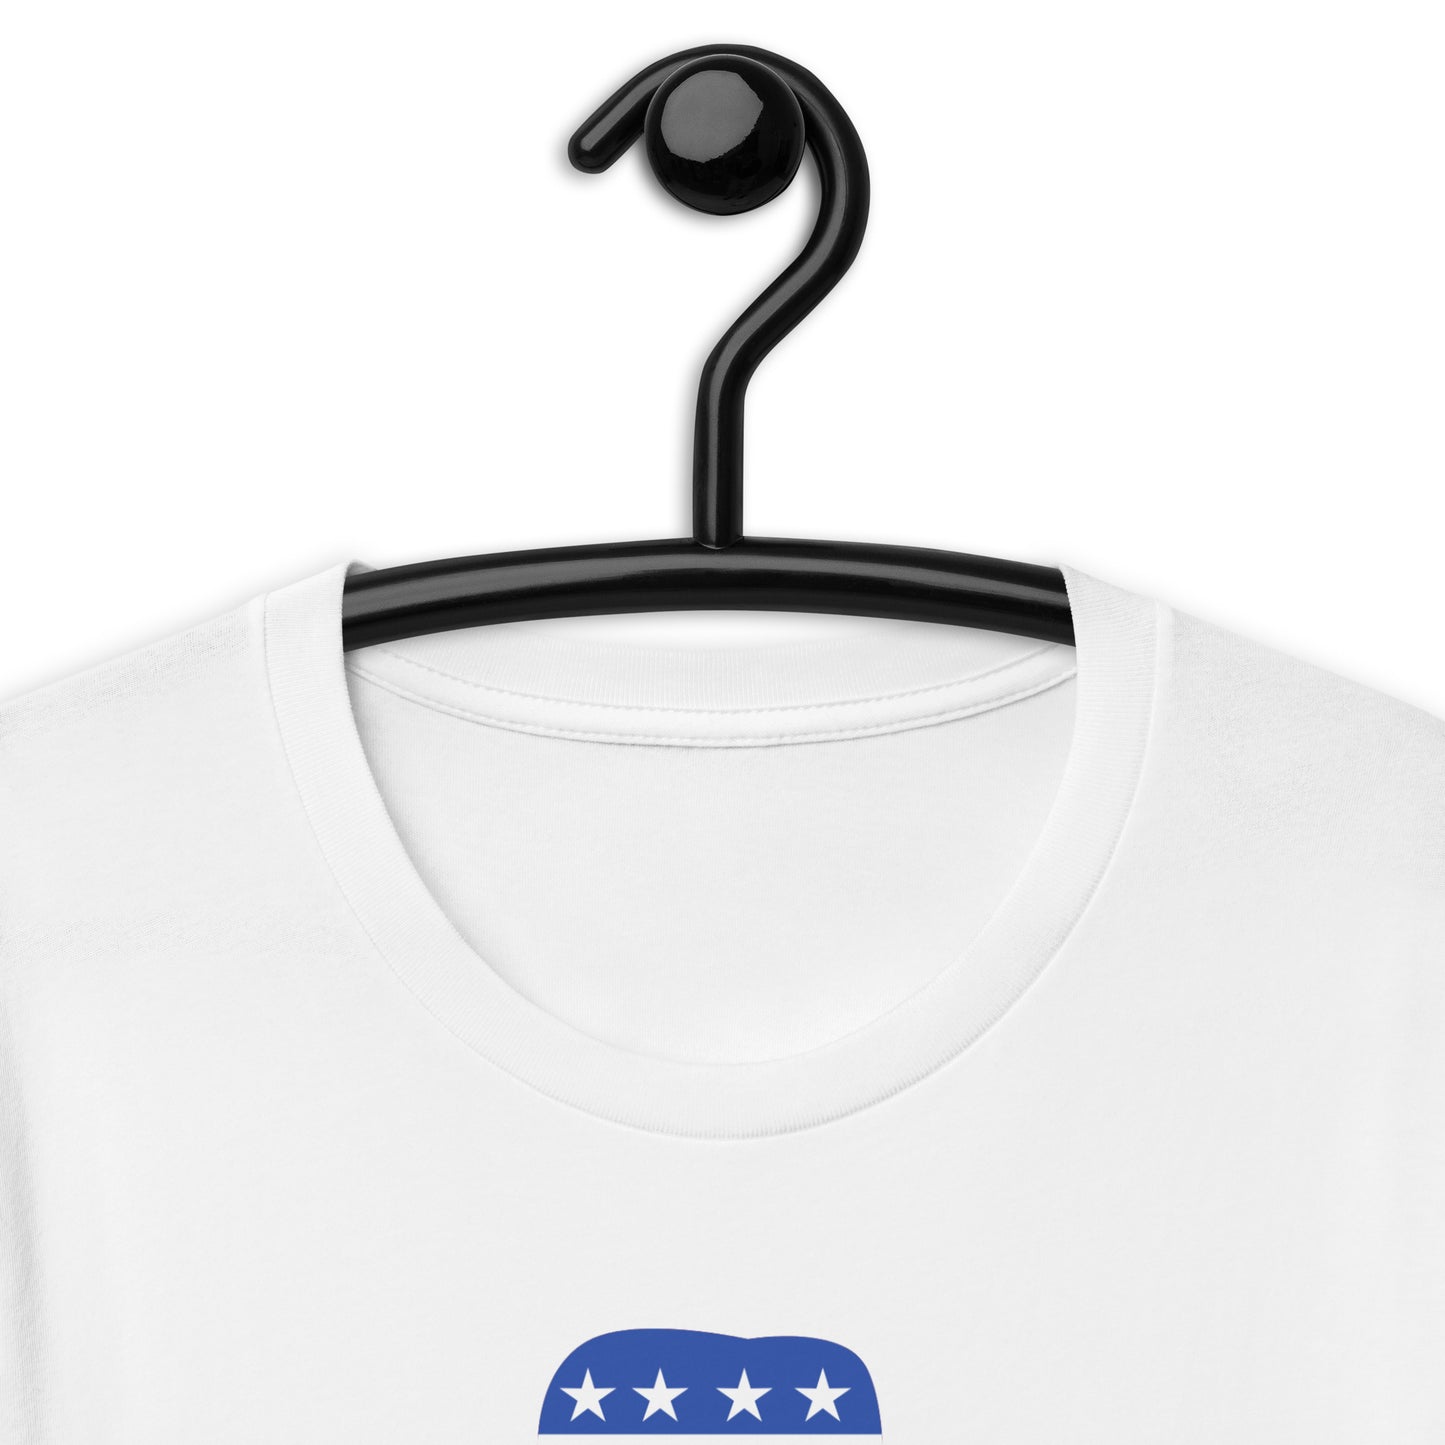 AMERICAN UNISEX T–SHIRT "ELEPHANT" WHITE ZOOM IN - www.firstamericanstore.com